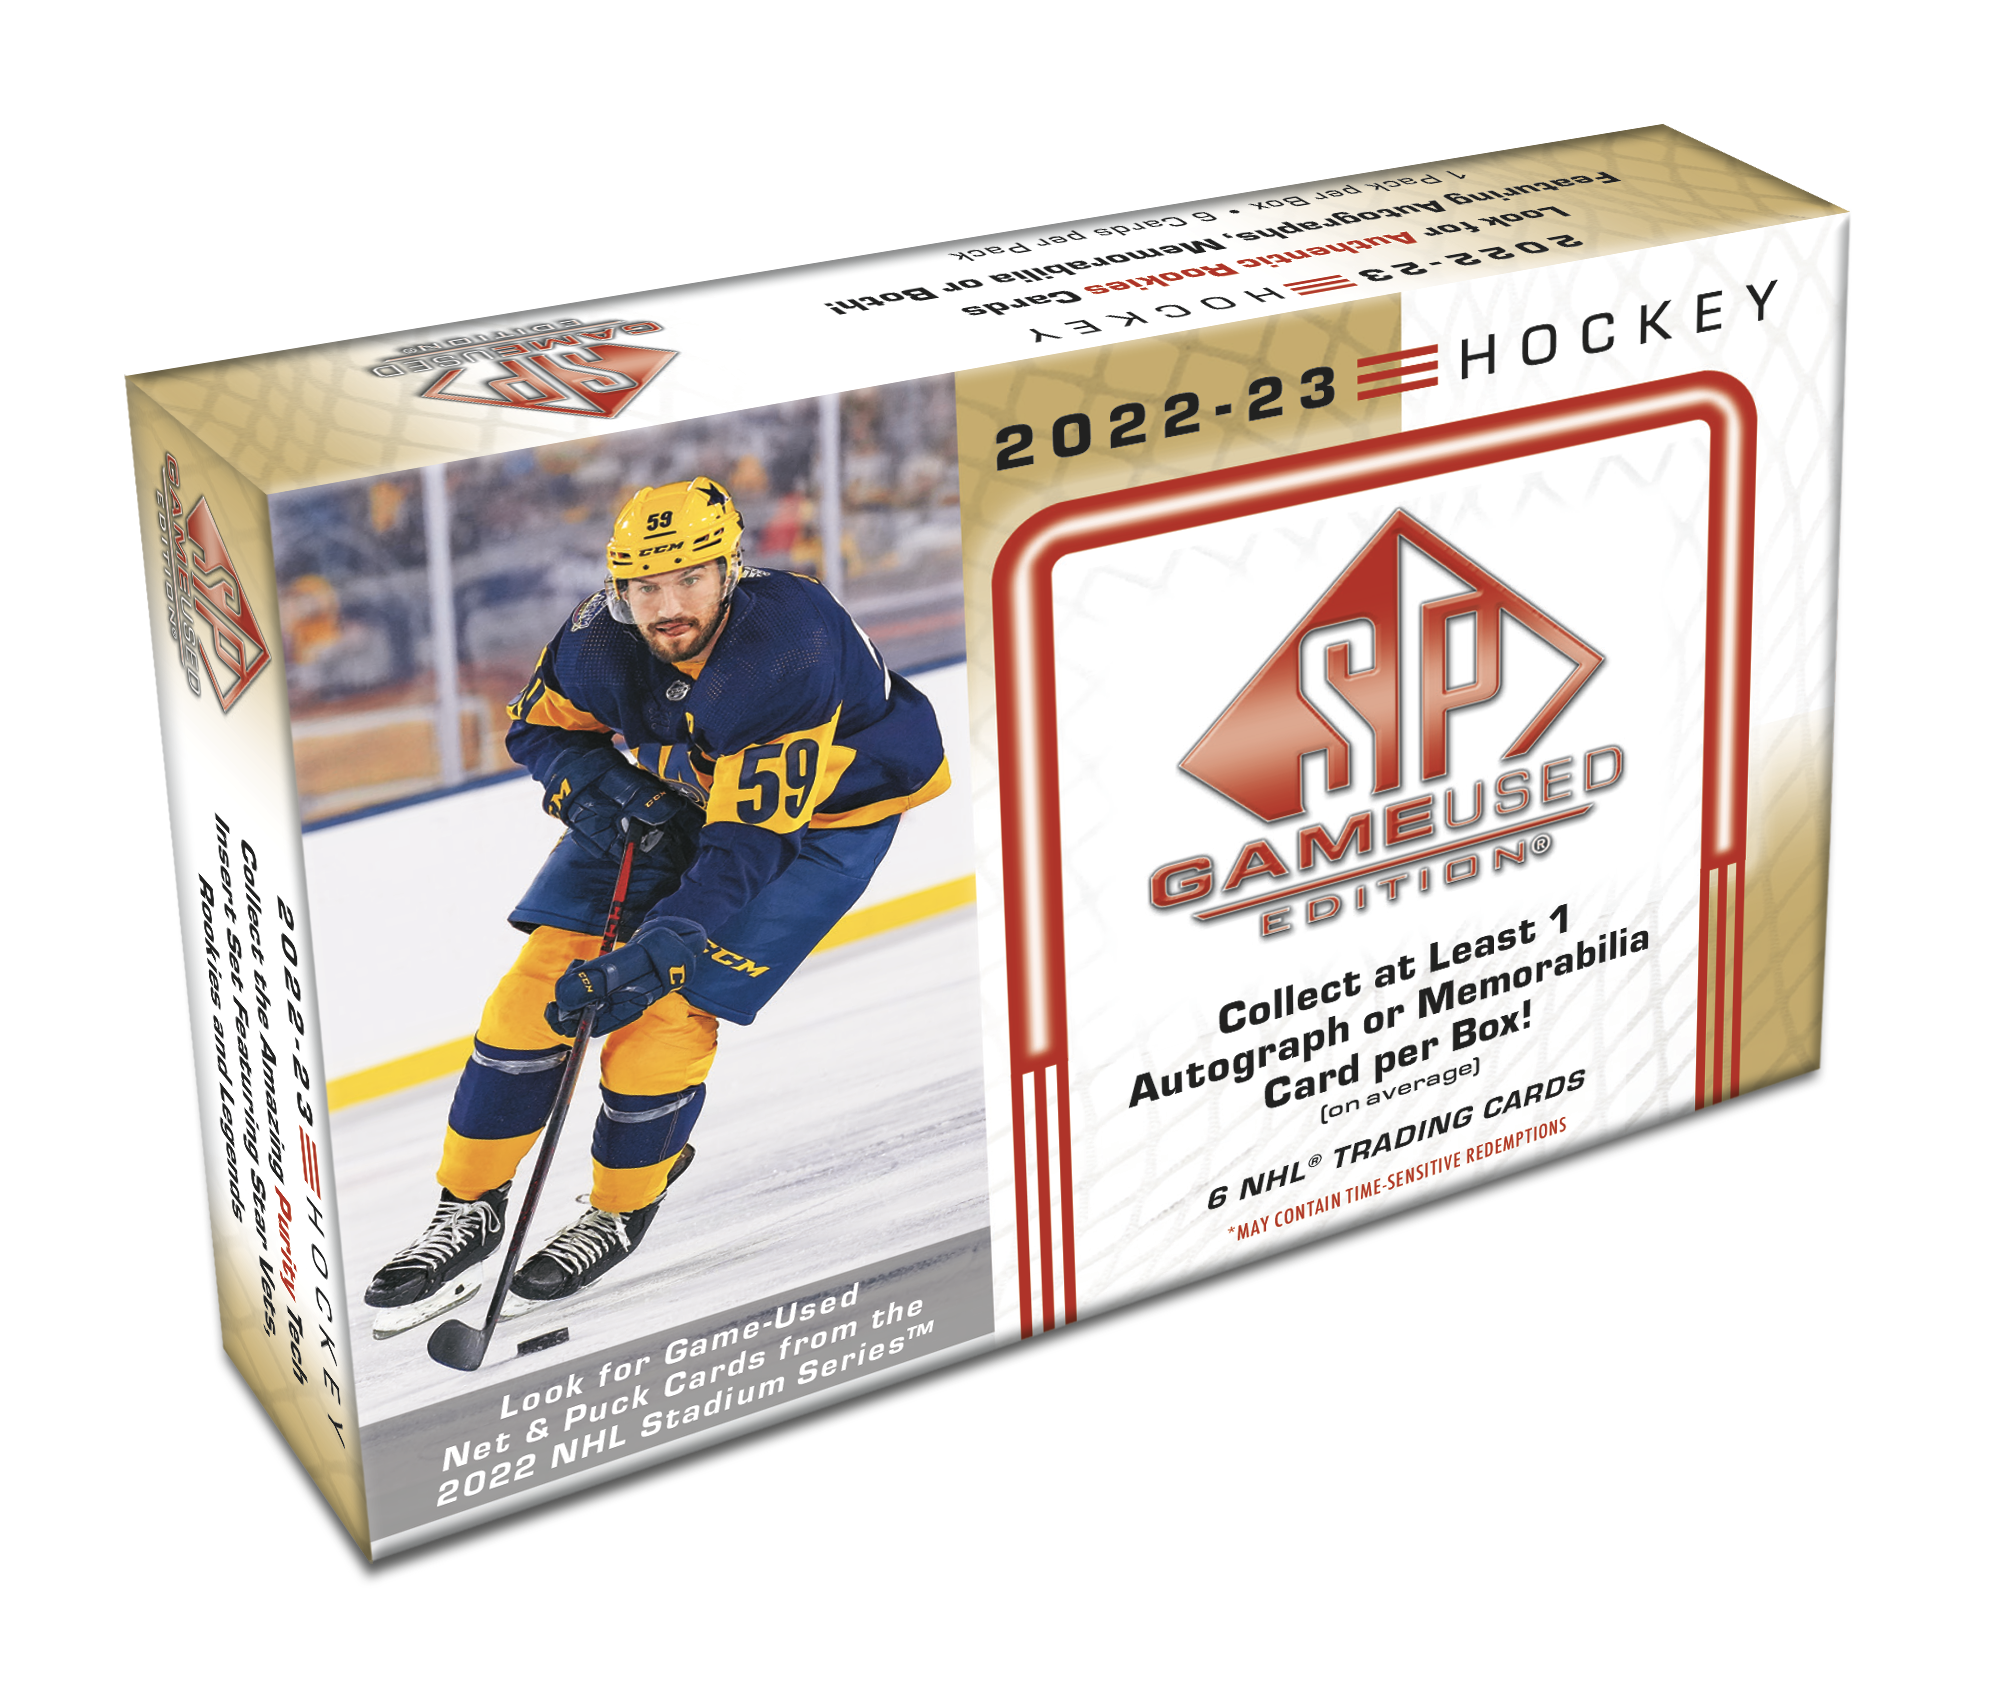 2022-23 Upper Deck SP Game Used Hockey Hobby Box Case (Case of 18 Boxes) (Pre-Order) - Miraj Trading